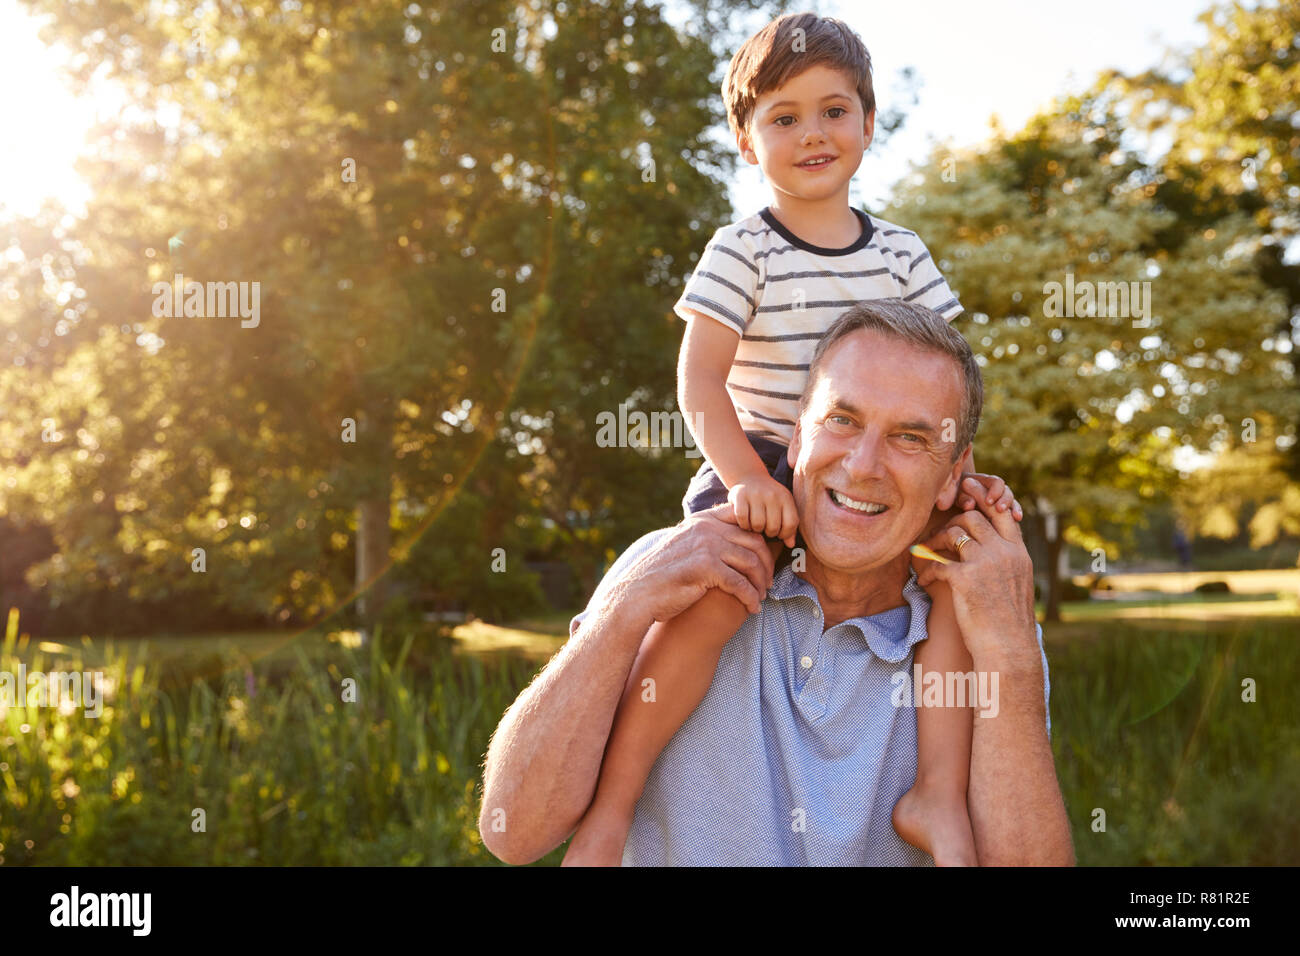 Portrait Of Grandfather Giving Grandson Ride On Shoulders In Summer Park Stock Photo